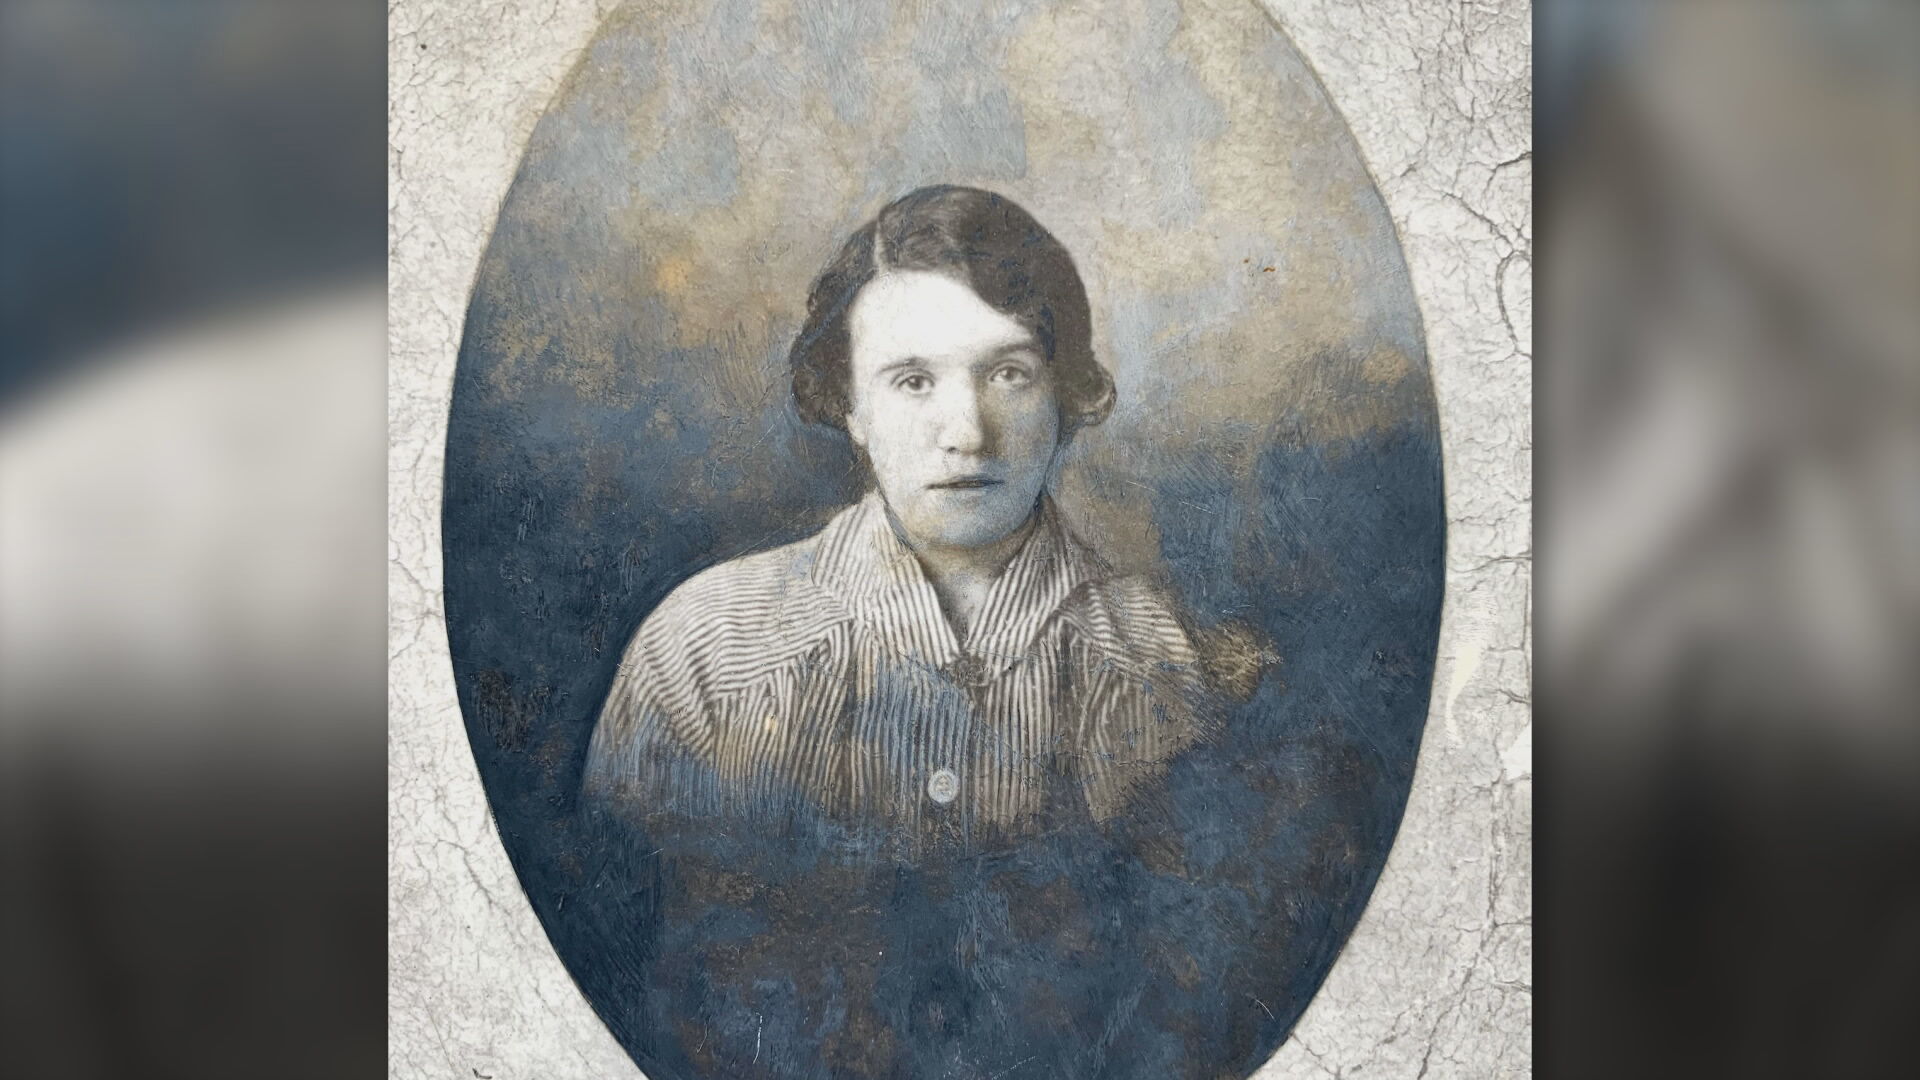 A young Mary Brooksbank. Image Courtesy of Dundee Central Library